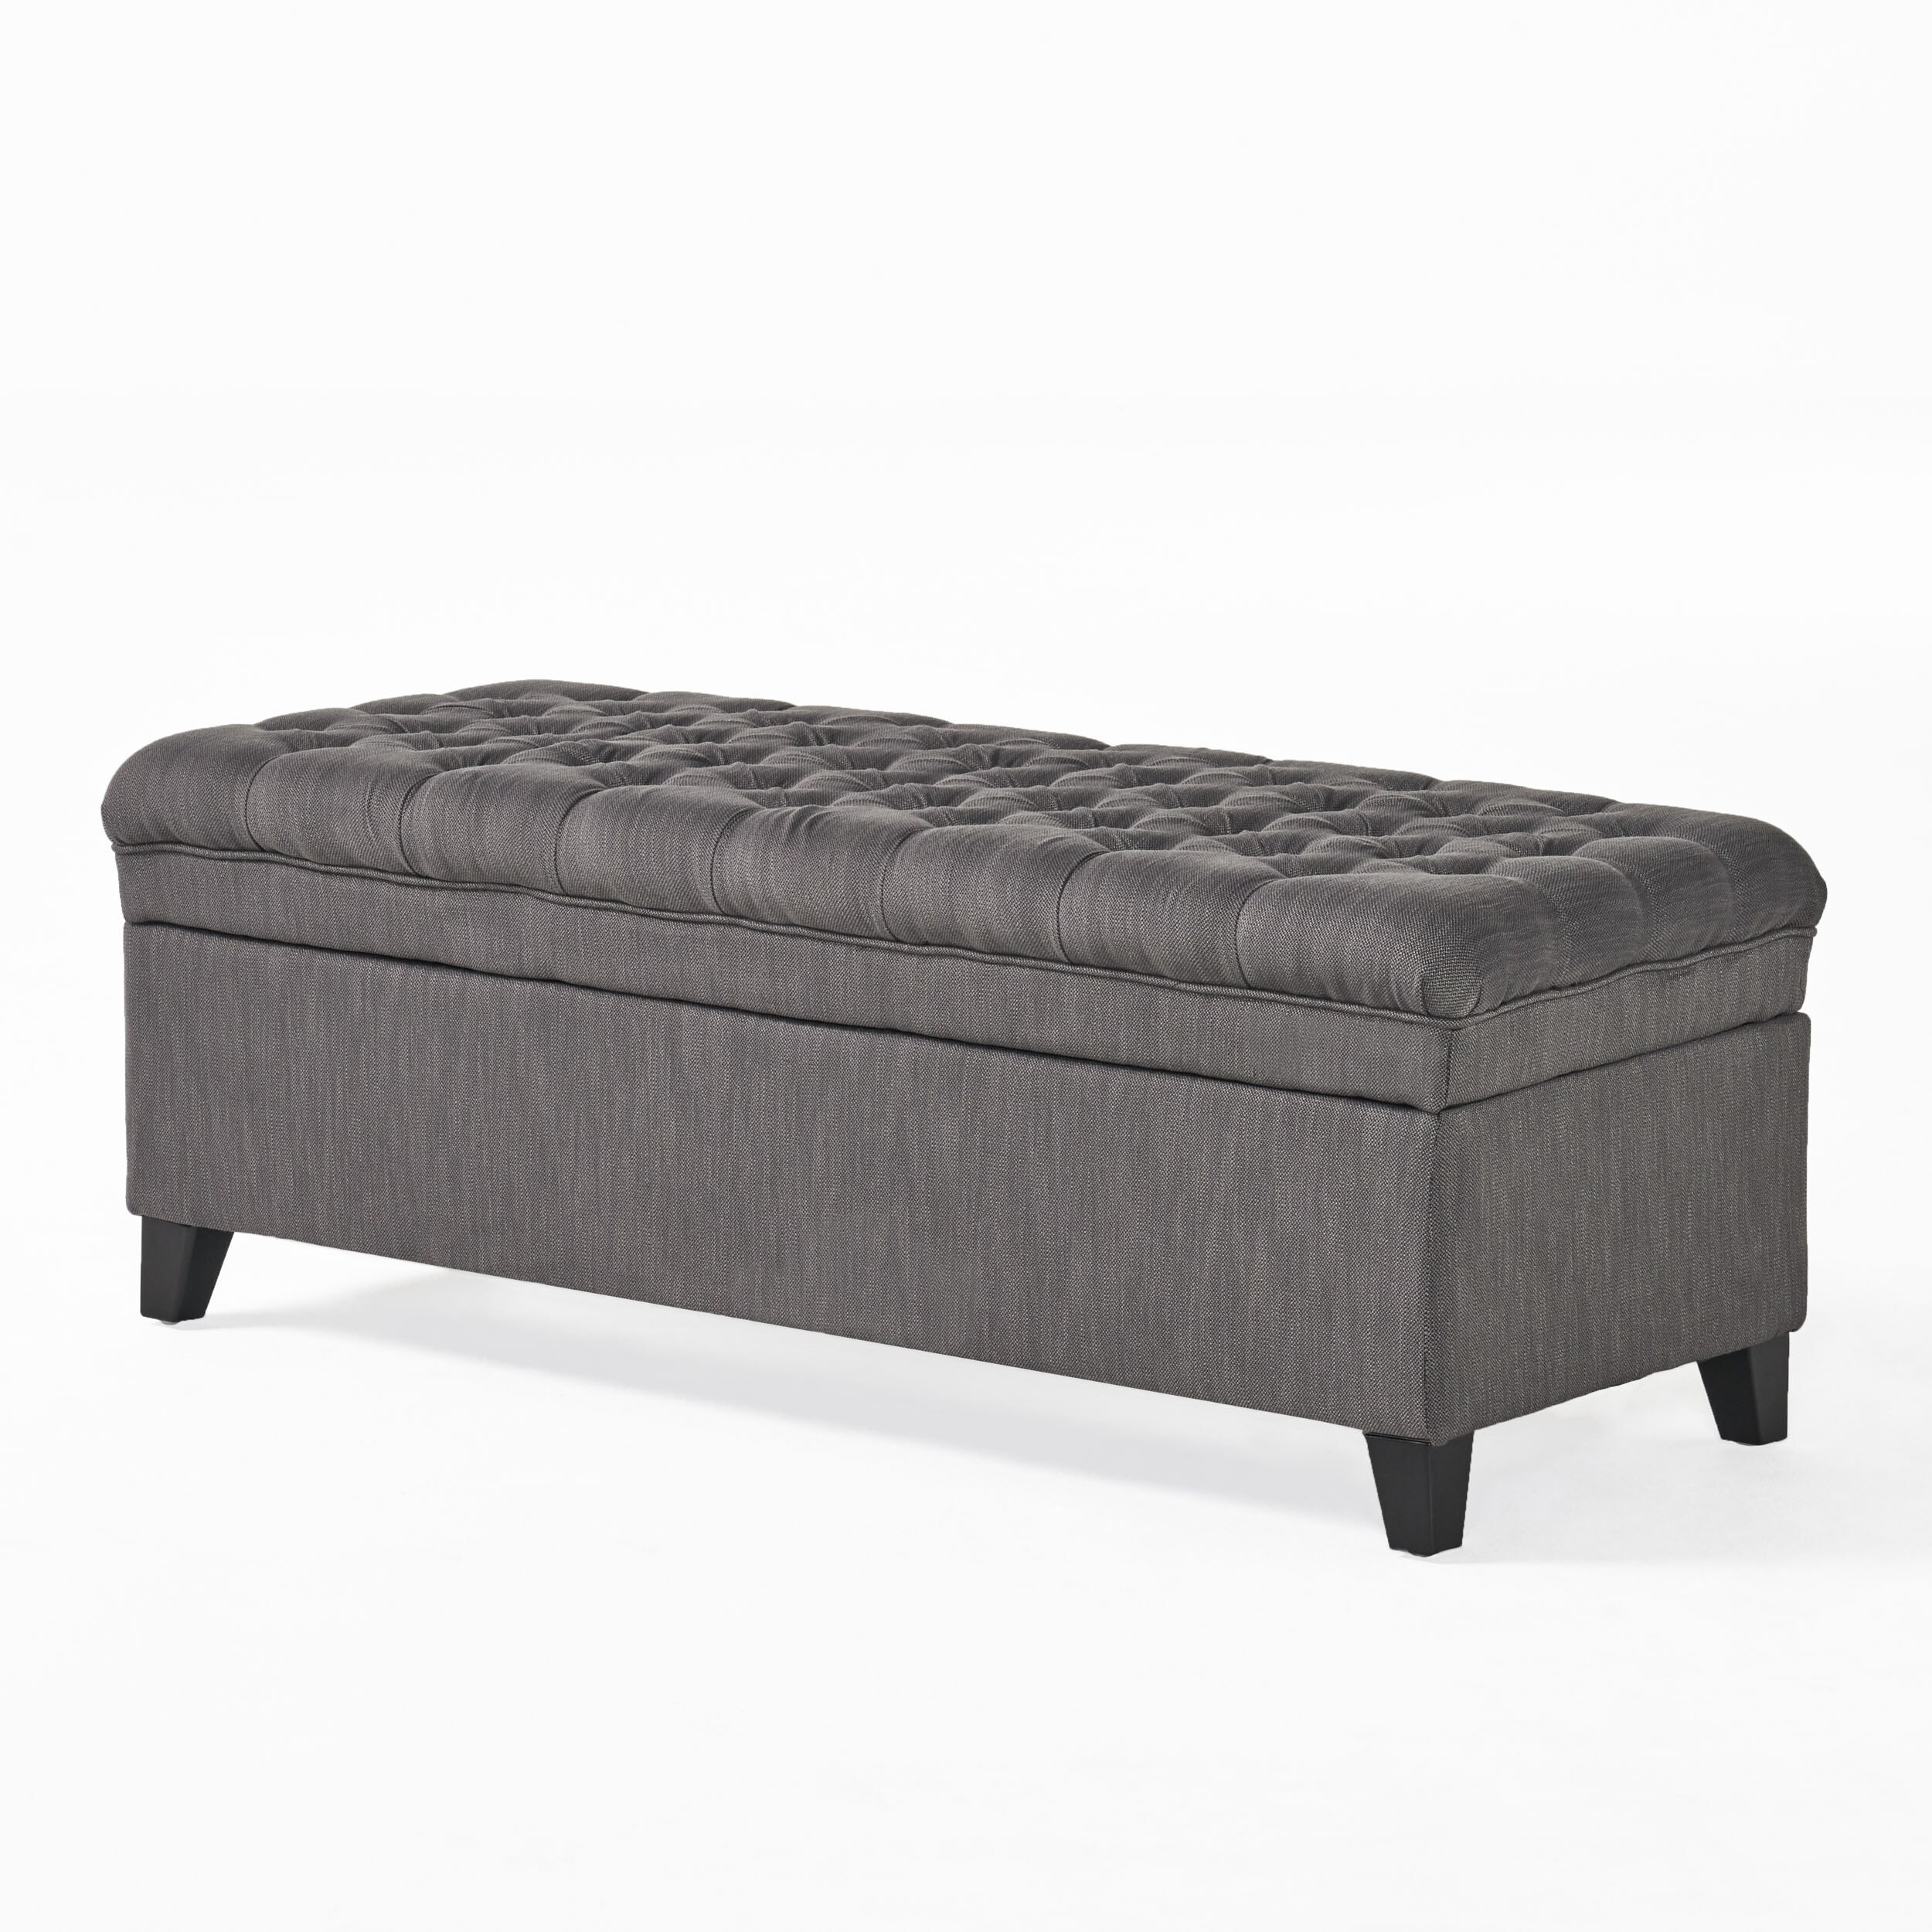 Best Selling Home Decor Juliana Midcentury Gray Storage Ottoman in the ...